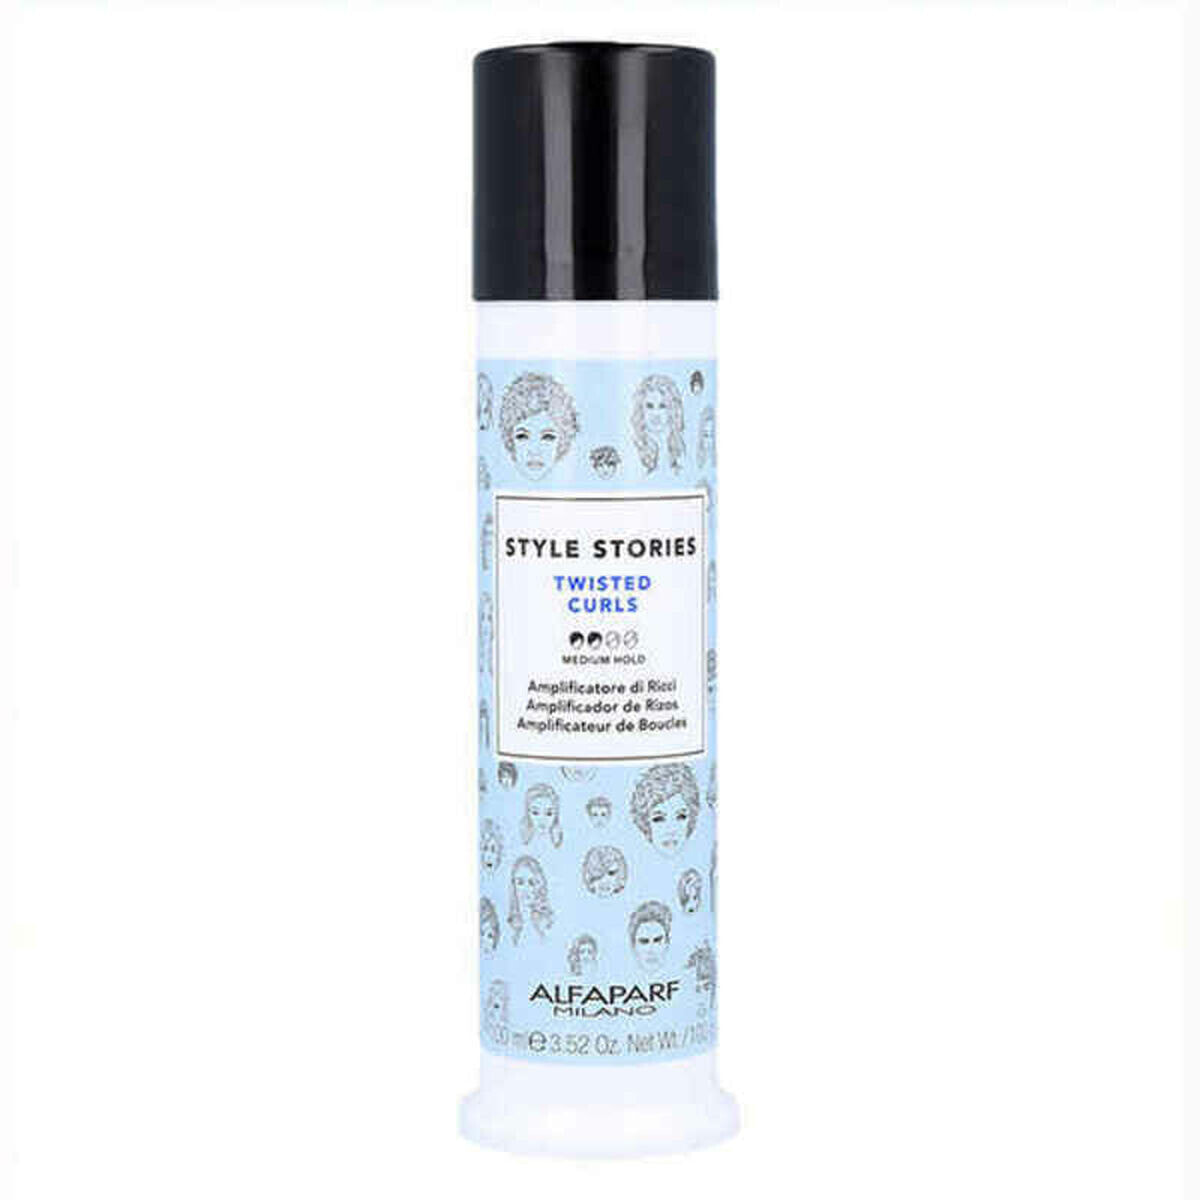 Hair Spray Style Stories Twisted Curls Alfaparf Milano Style Stories (100 ml)